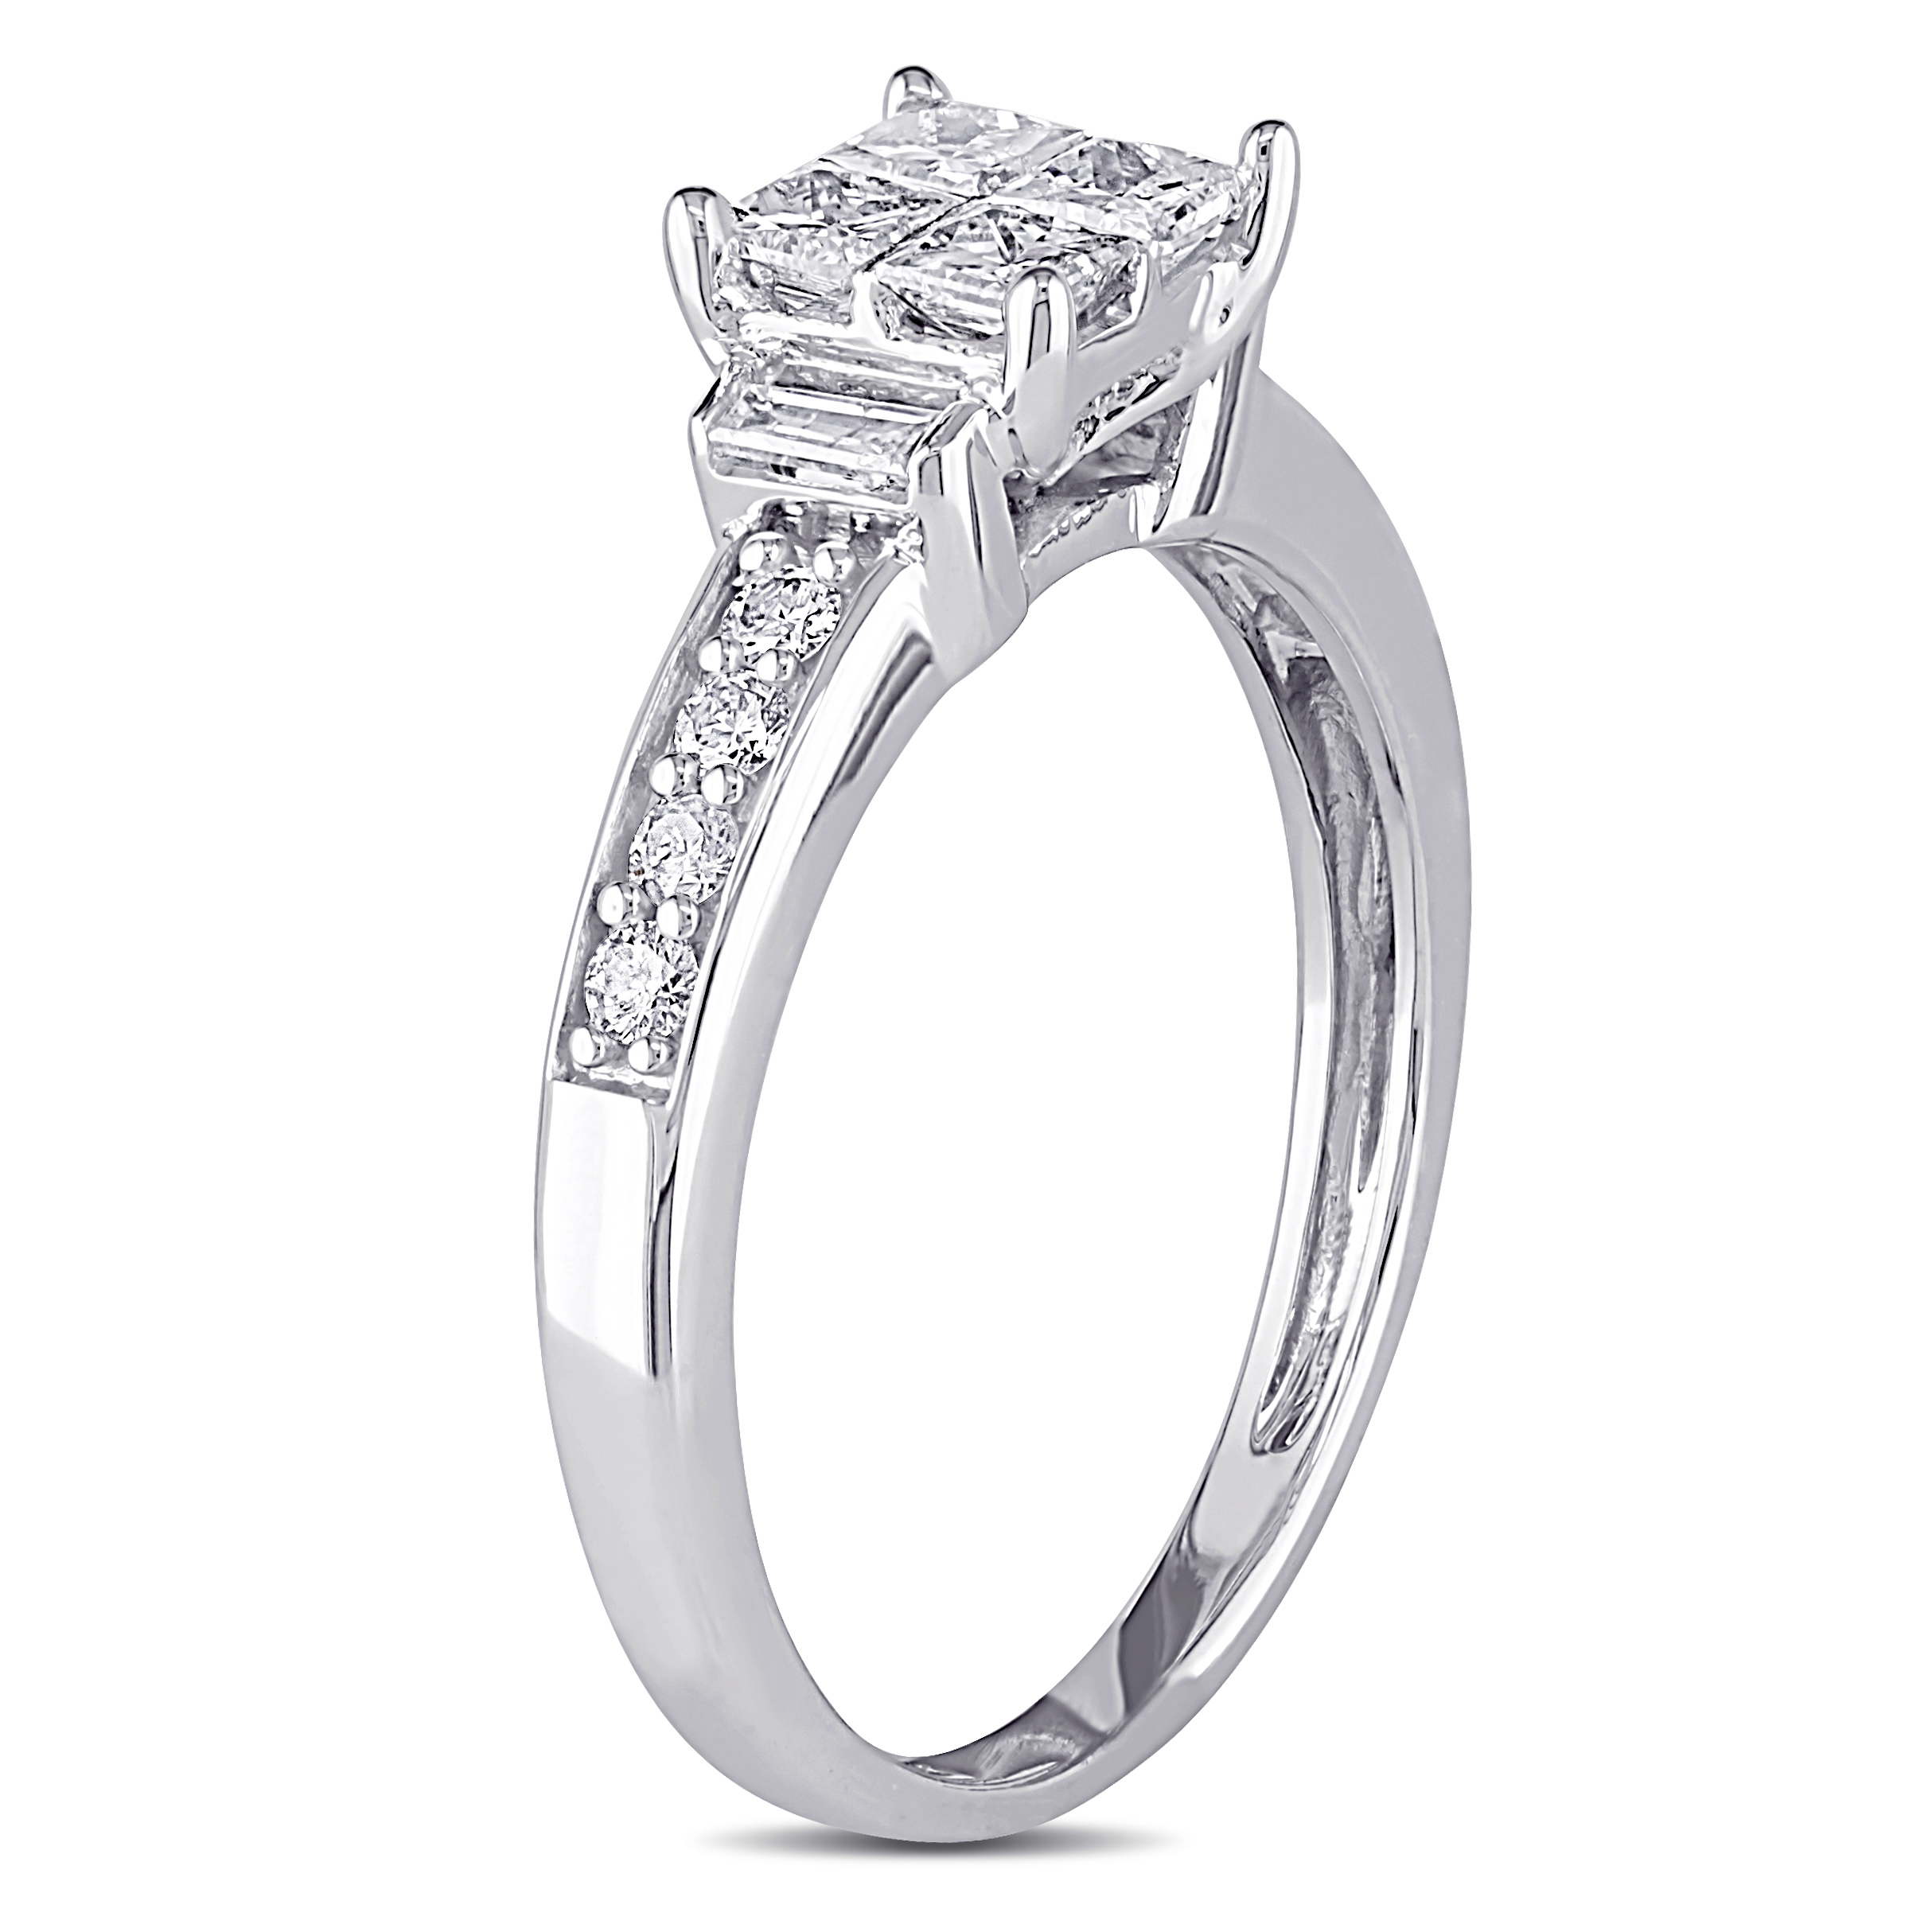 5/8 CT TW Princess Cut, Baguette, and Round Diamond Engagement Ring in 14k White Gold